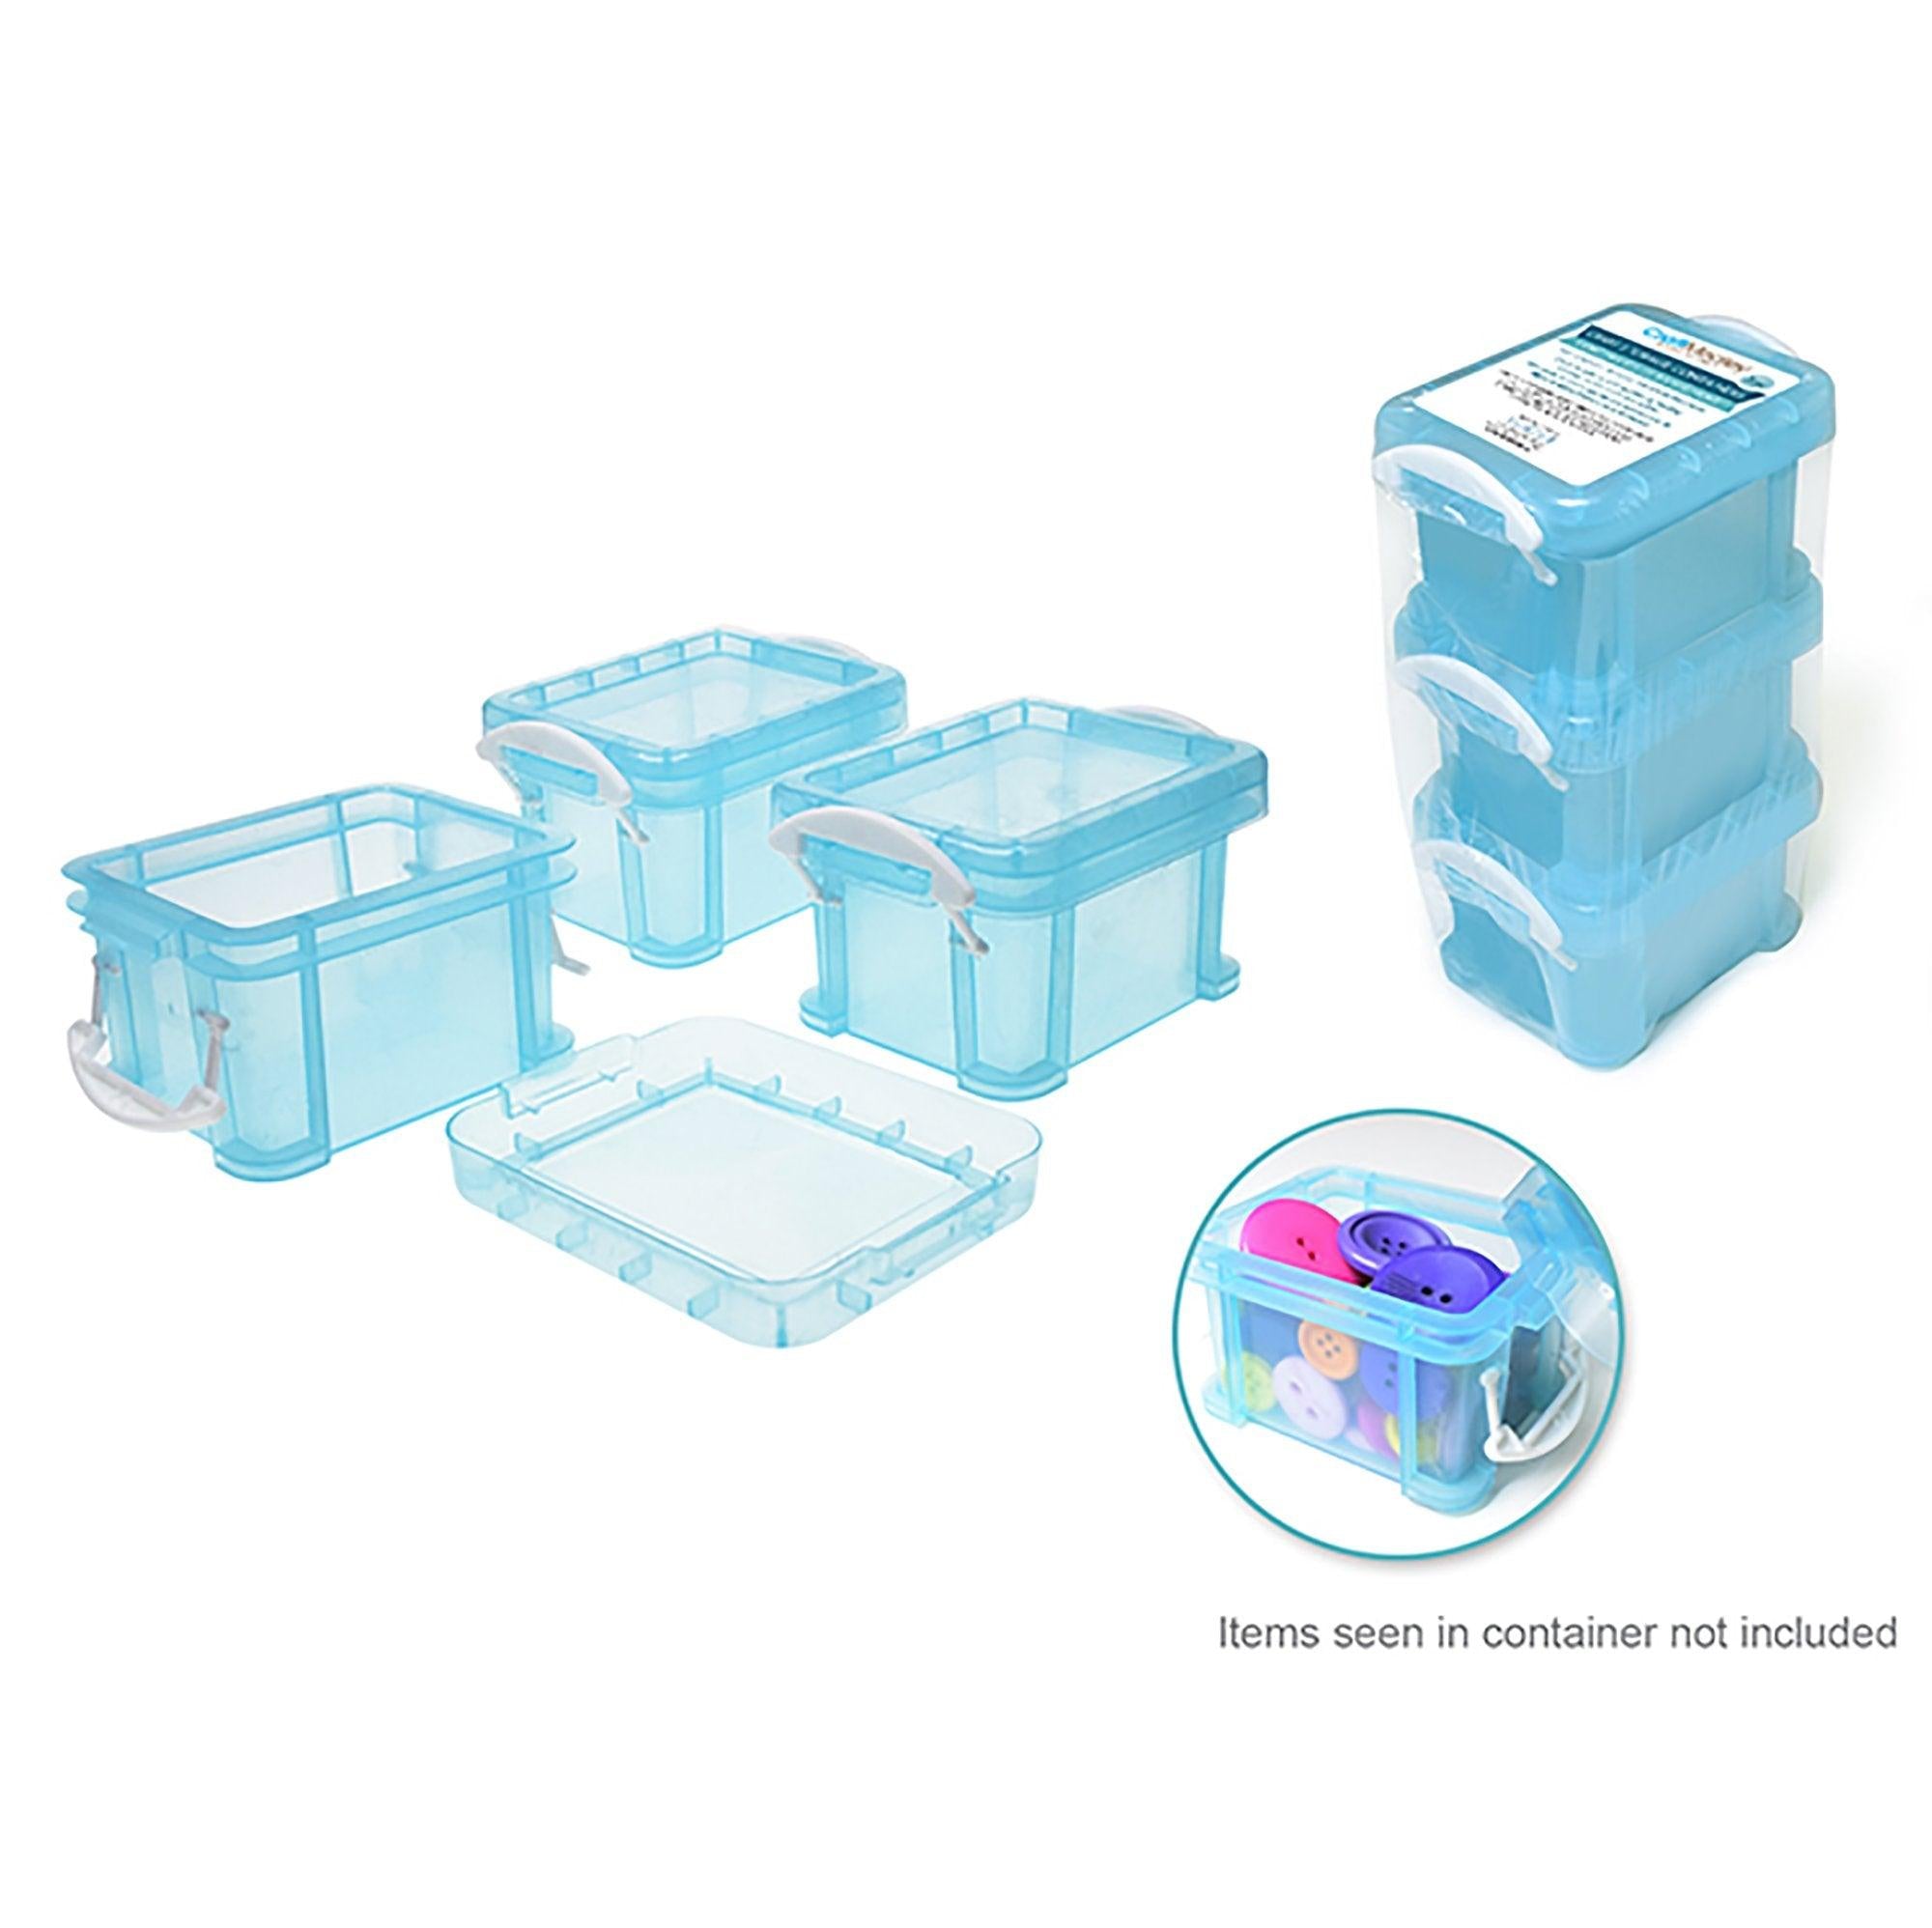 Craft Medley 3 Craft Storage Containers with Snap-on Lid Blue Plastic